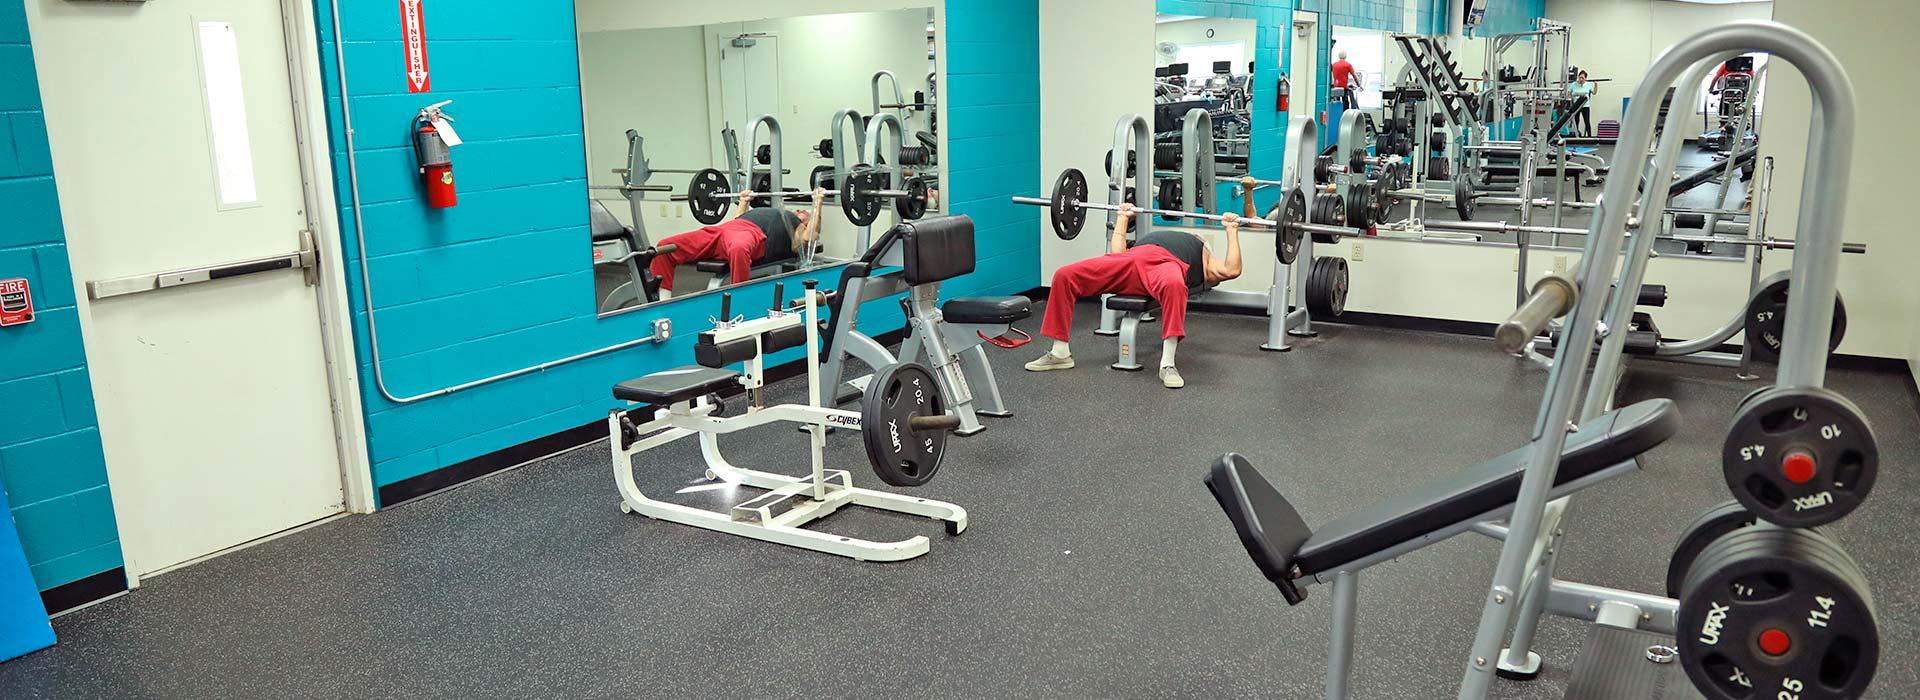 Free weight center at the Eastern Shore Family YMCA